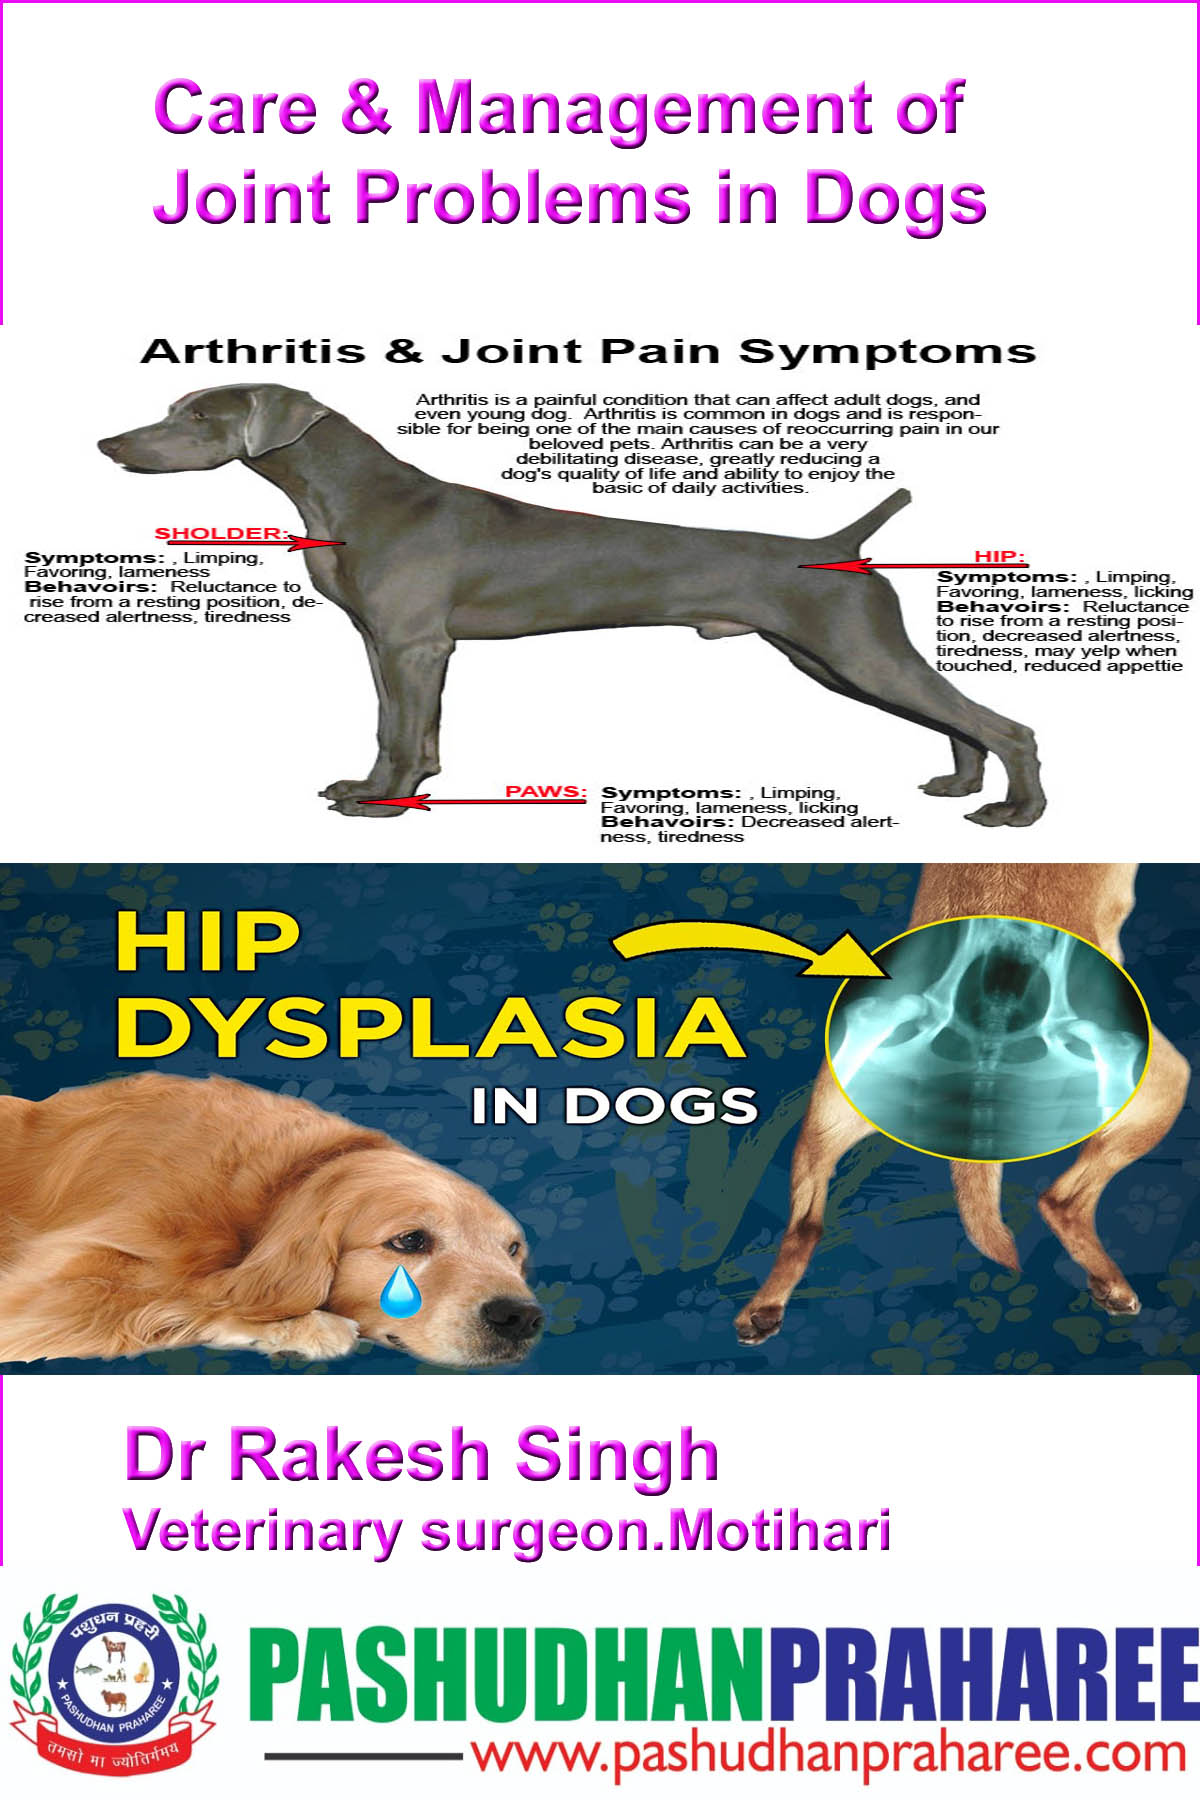 Care & Management of Joint Problems in Dogs